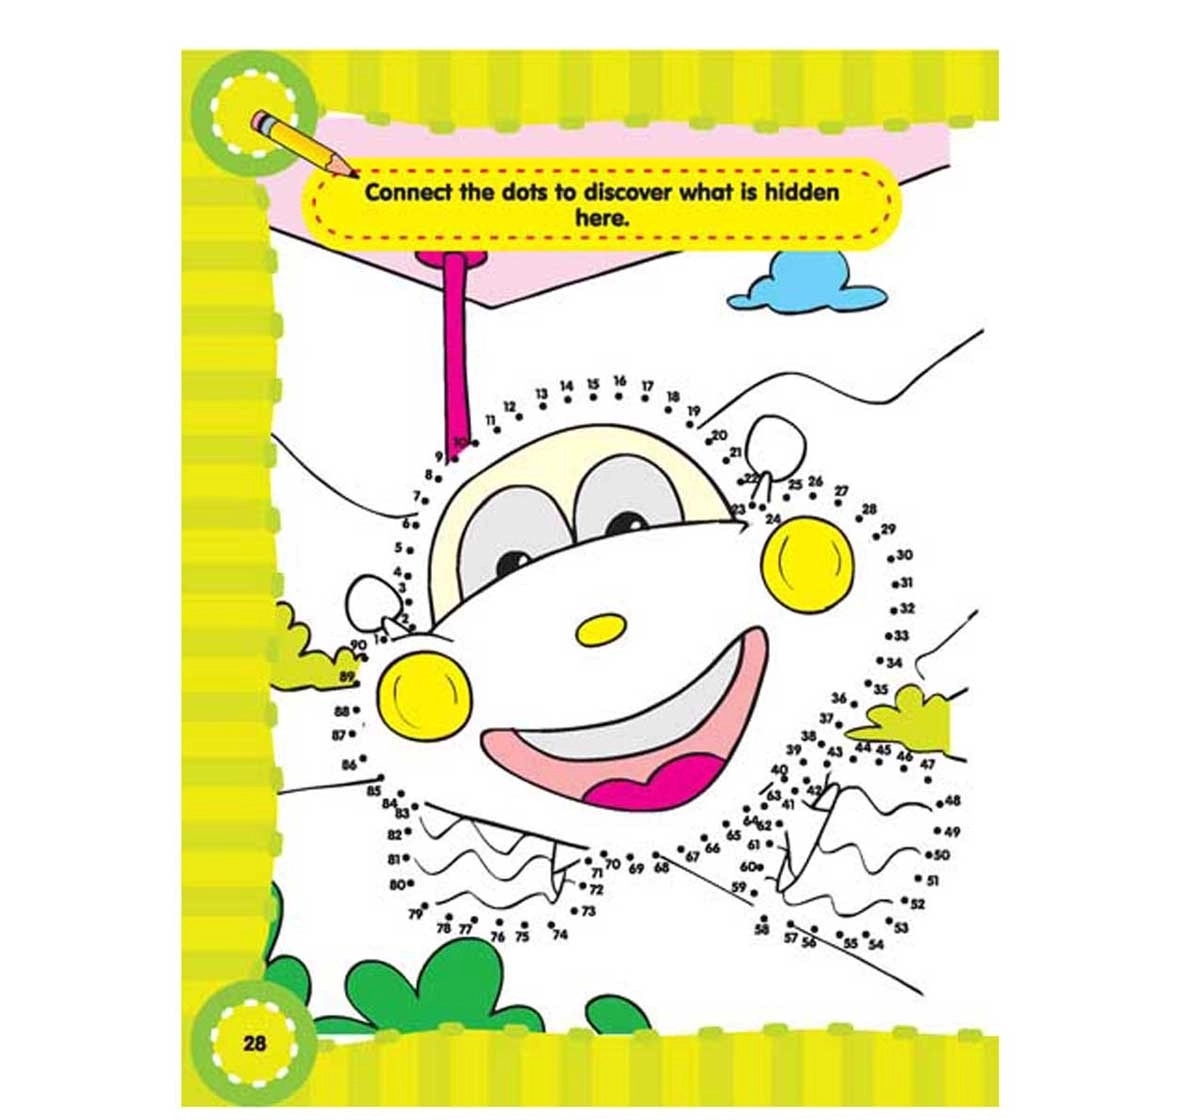 Dreamland Paperback Dot to Dot Activity Books for Kids 3Y+, Multicolour